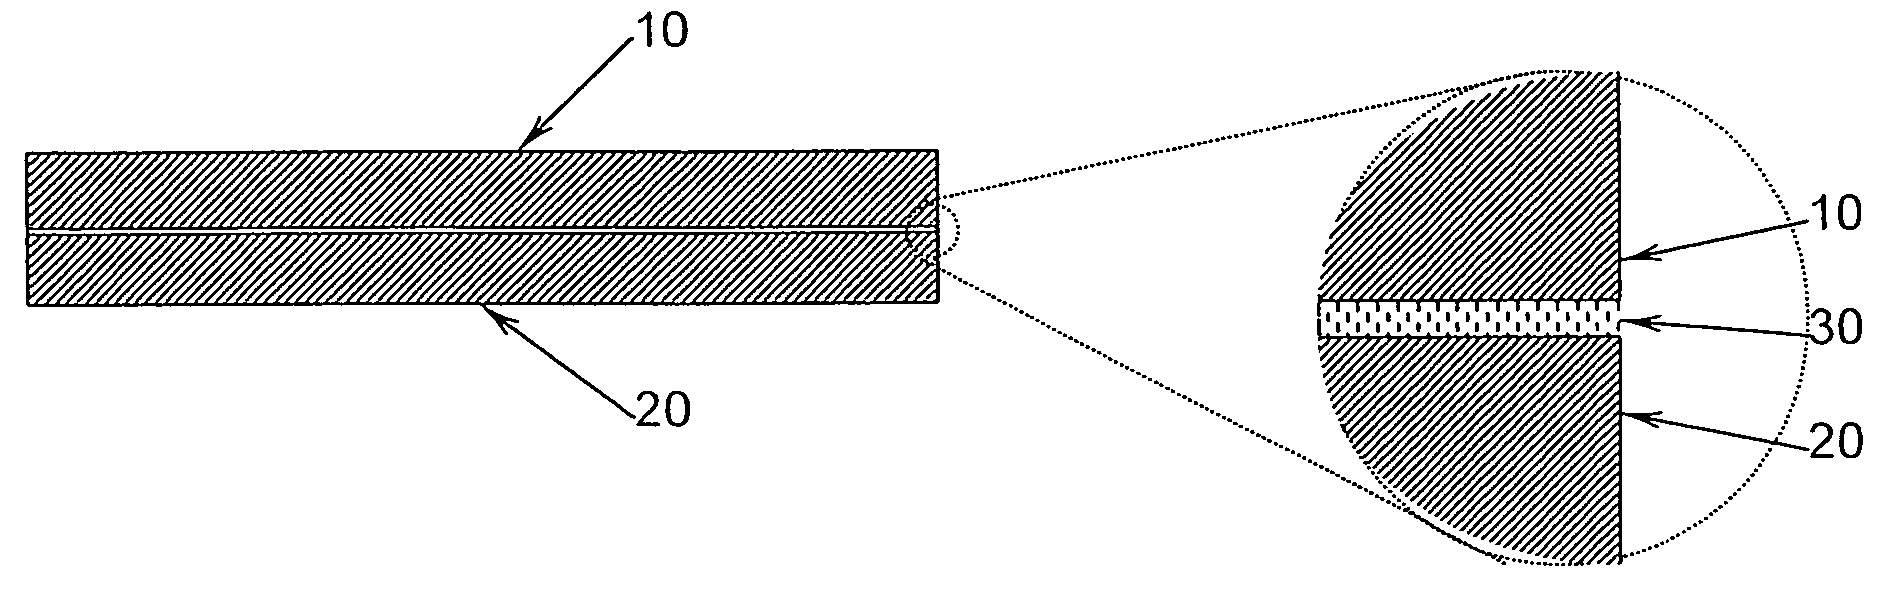 Laminated functional wafer for plastic optical elements